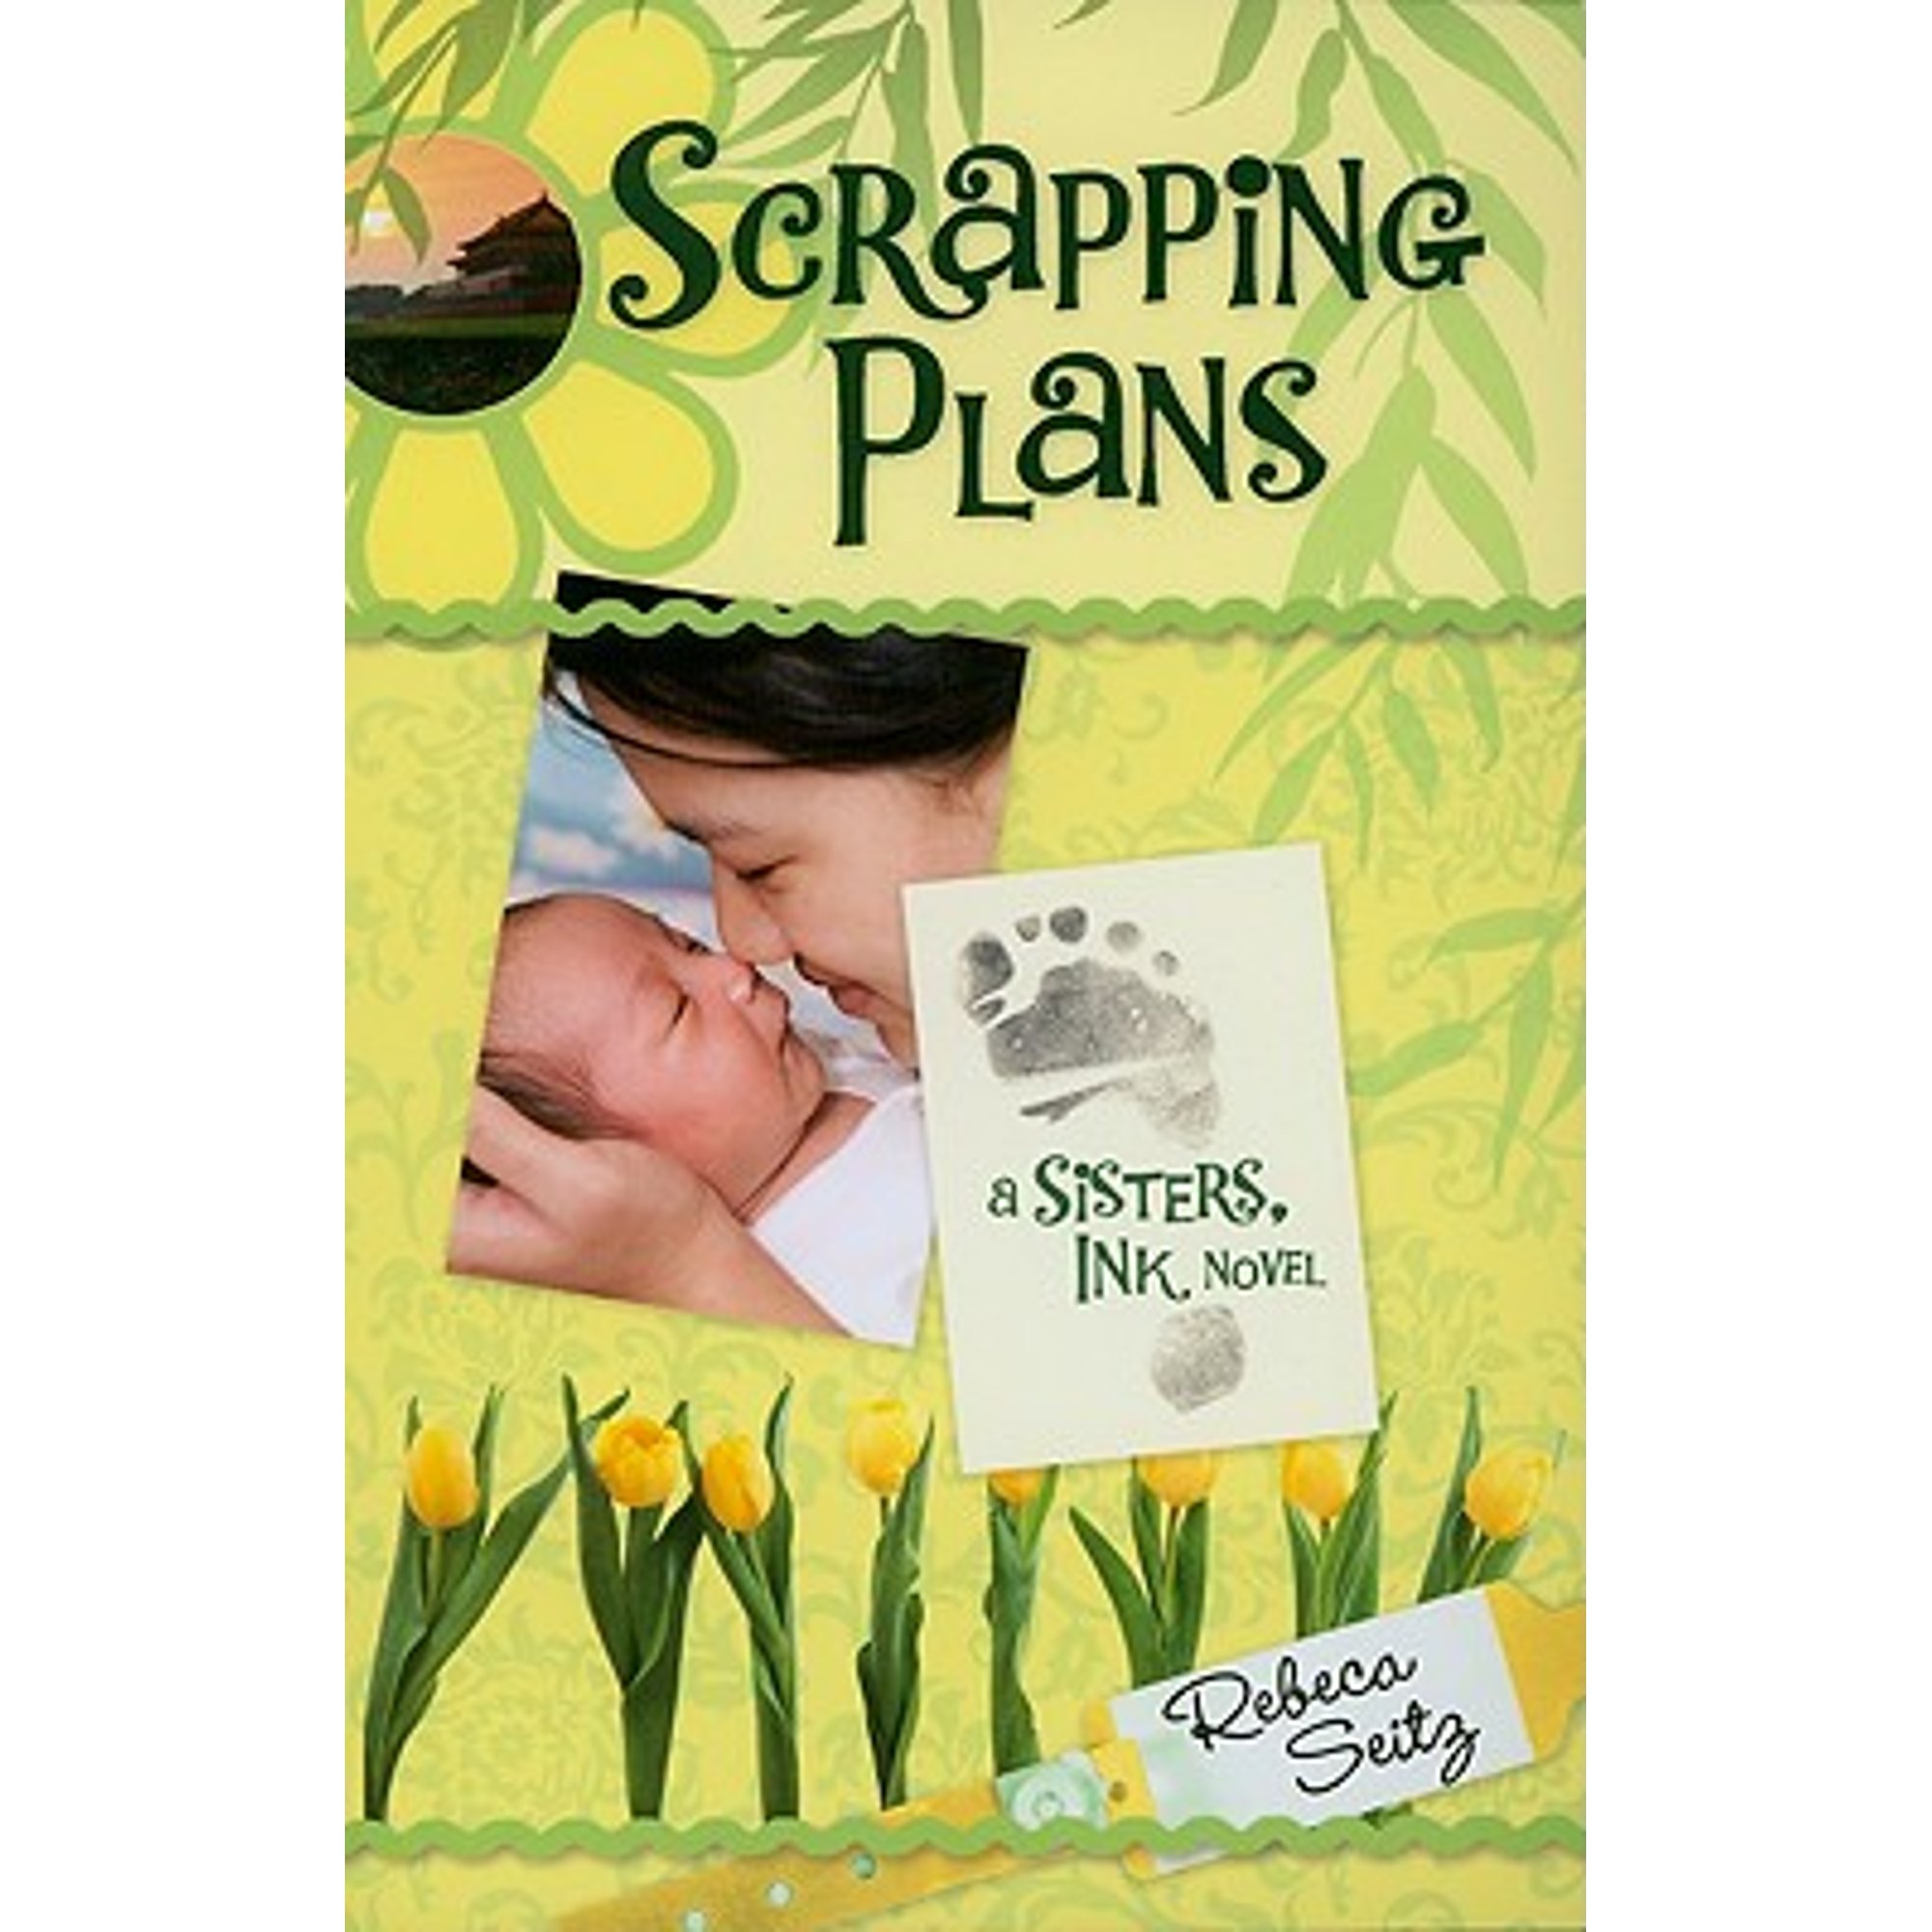 Scrapping Plans (Paperback) - image 1 of 2